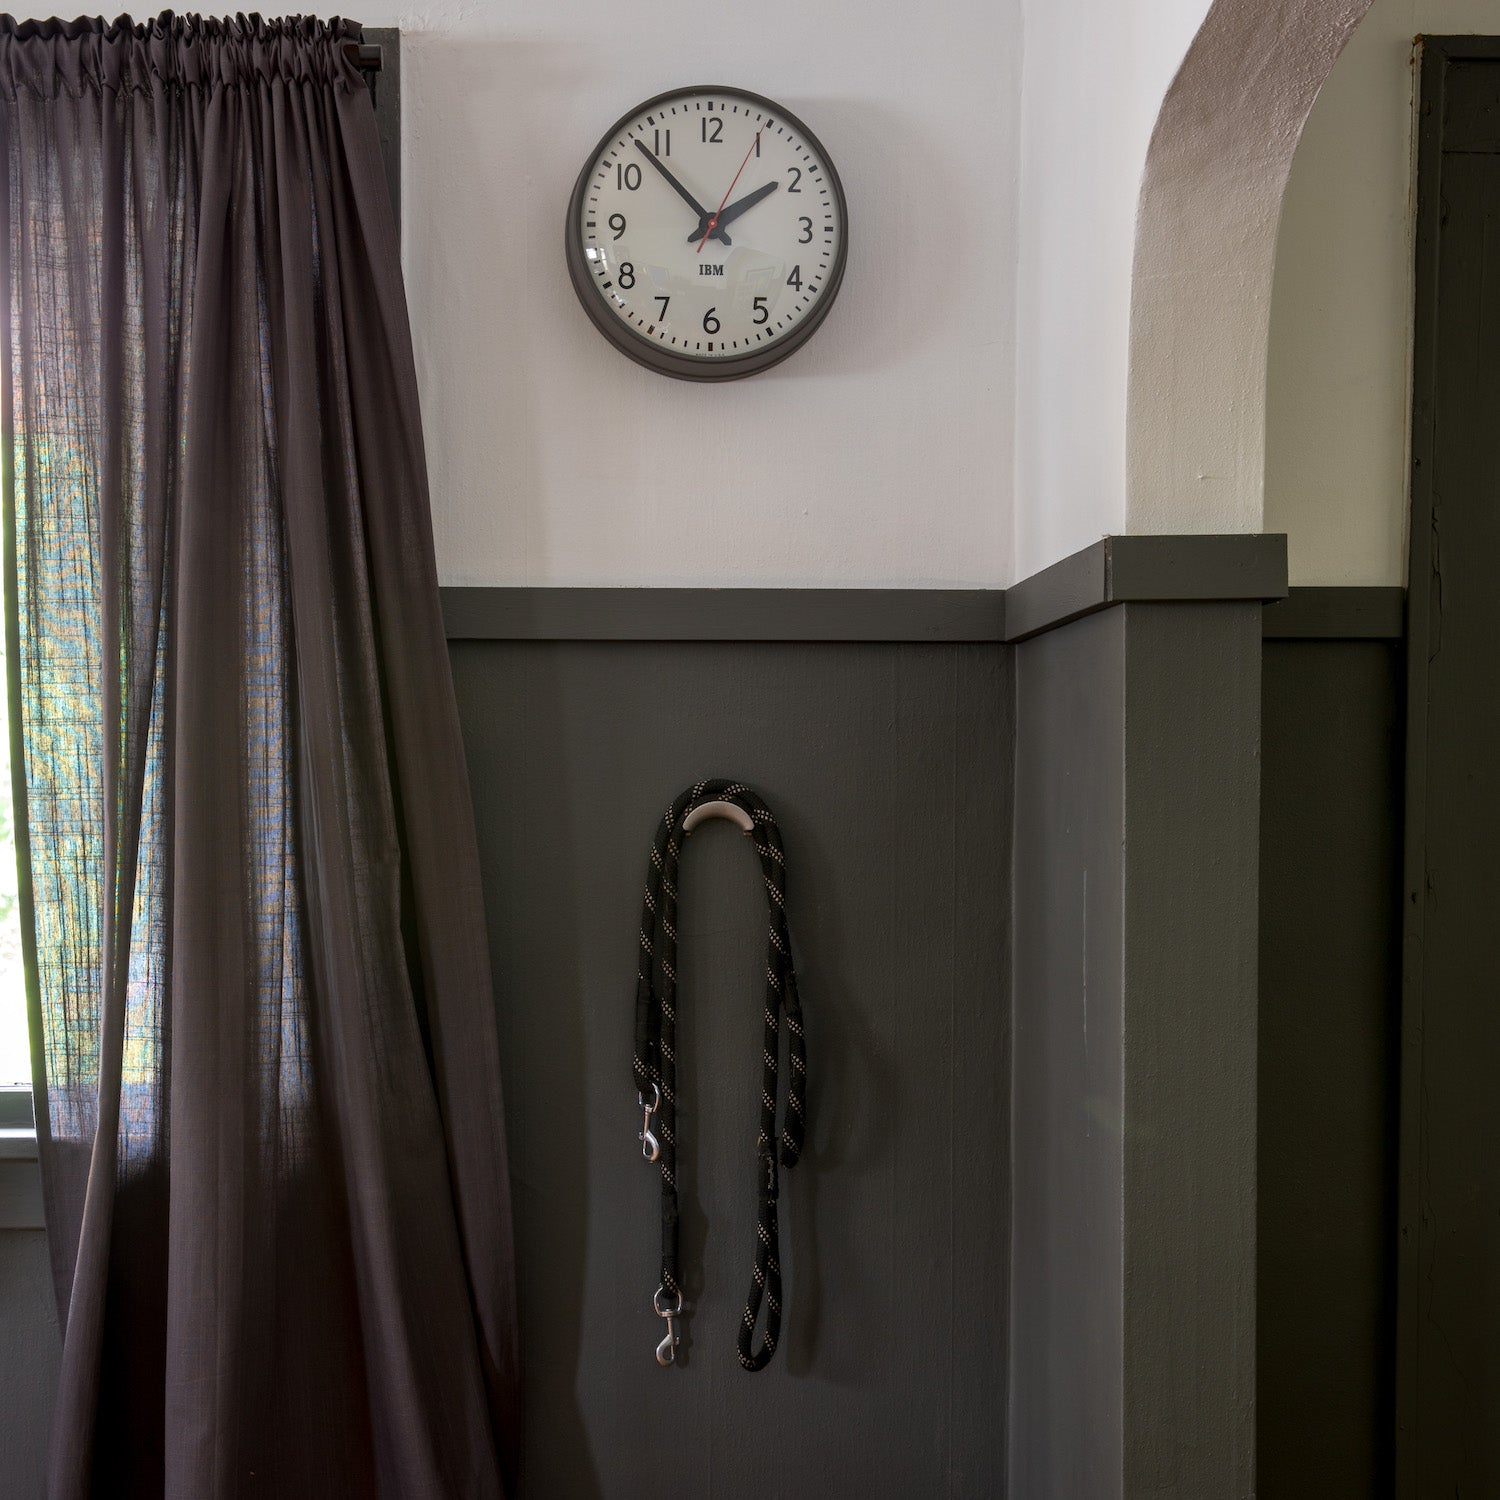 clock hangs from a wall